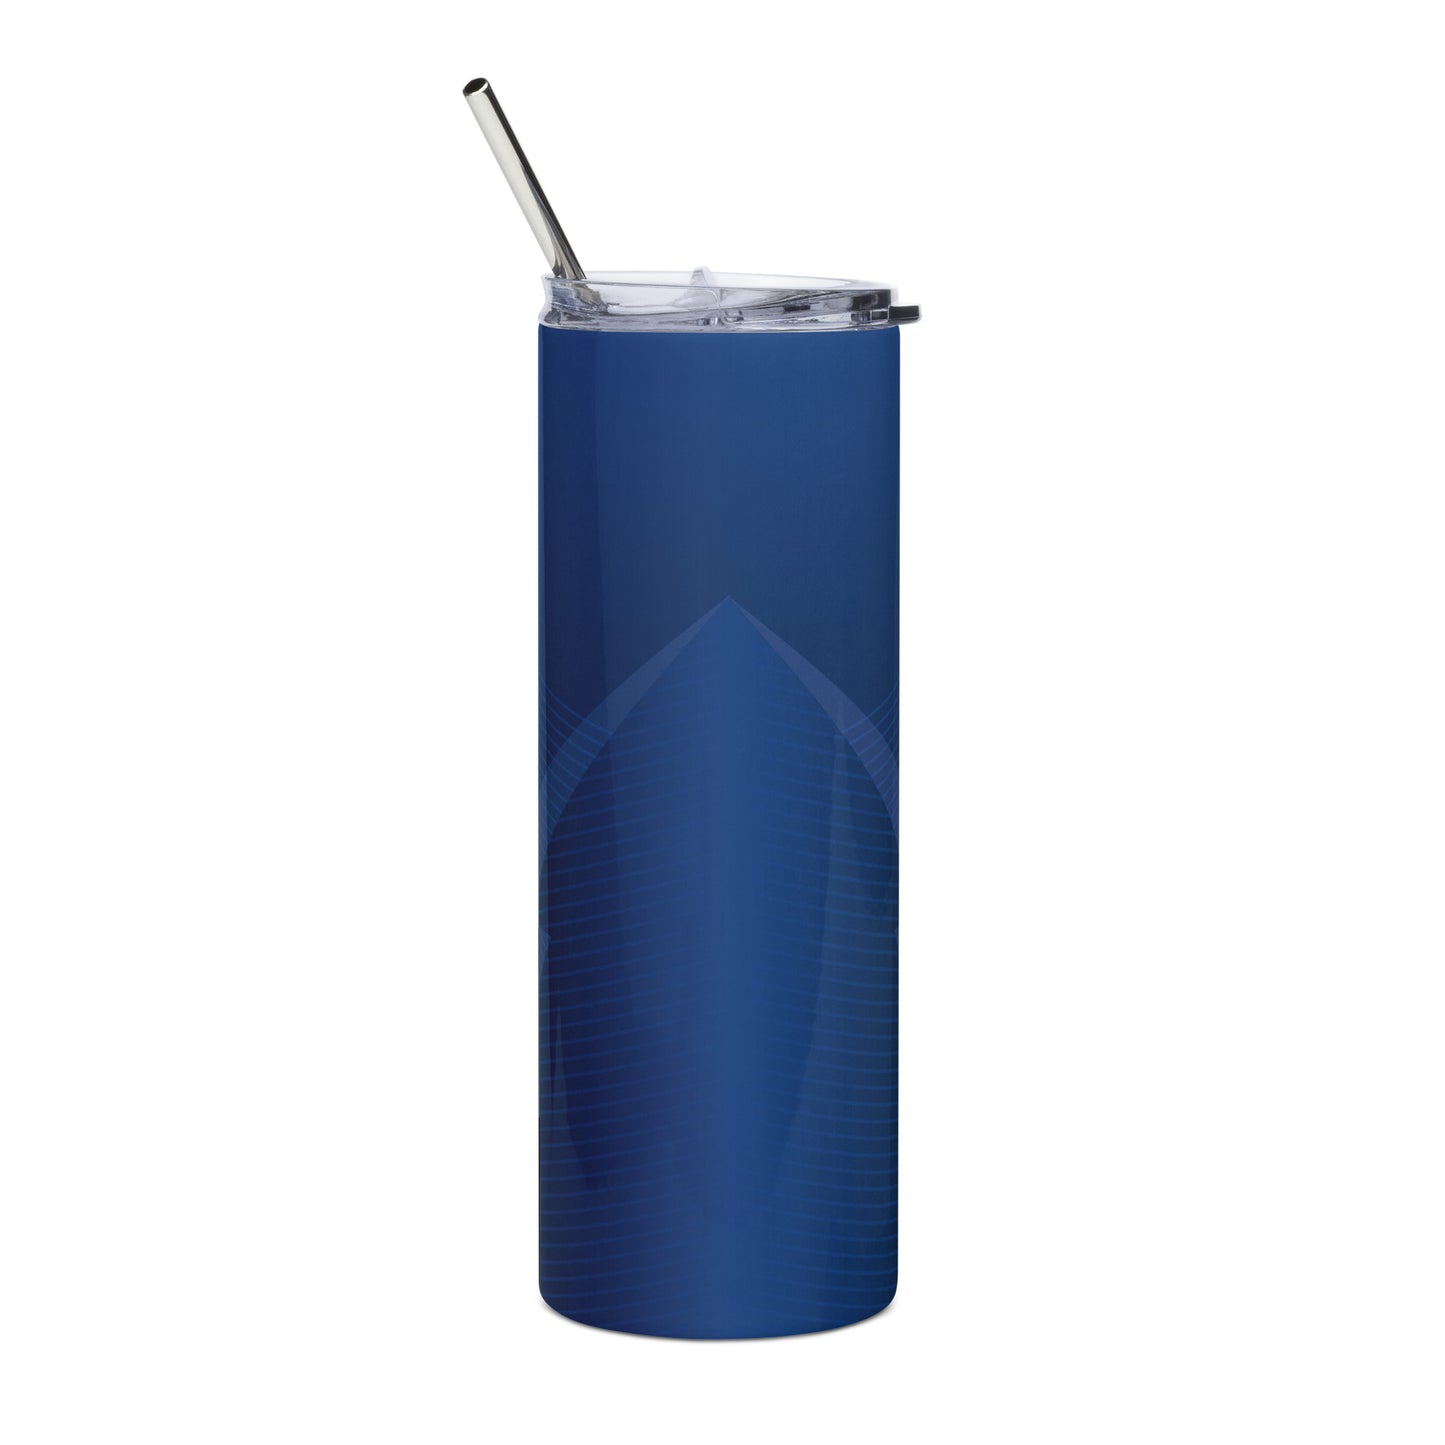 Only Talking to my Horse Today - Navy Blue - Stainless steel tumbler